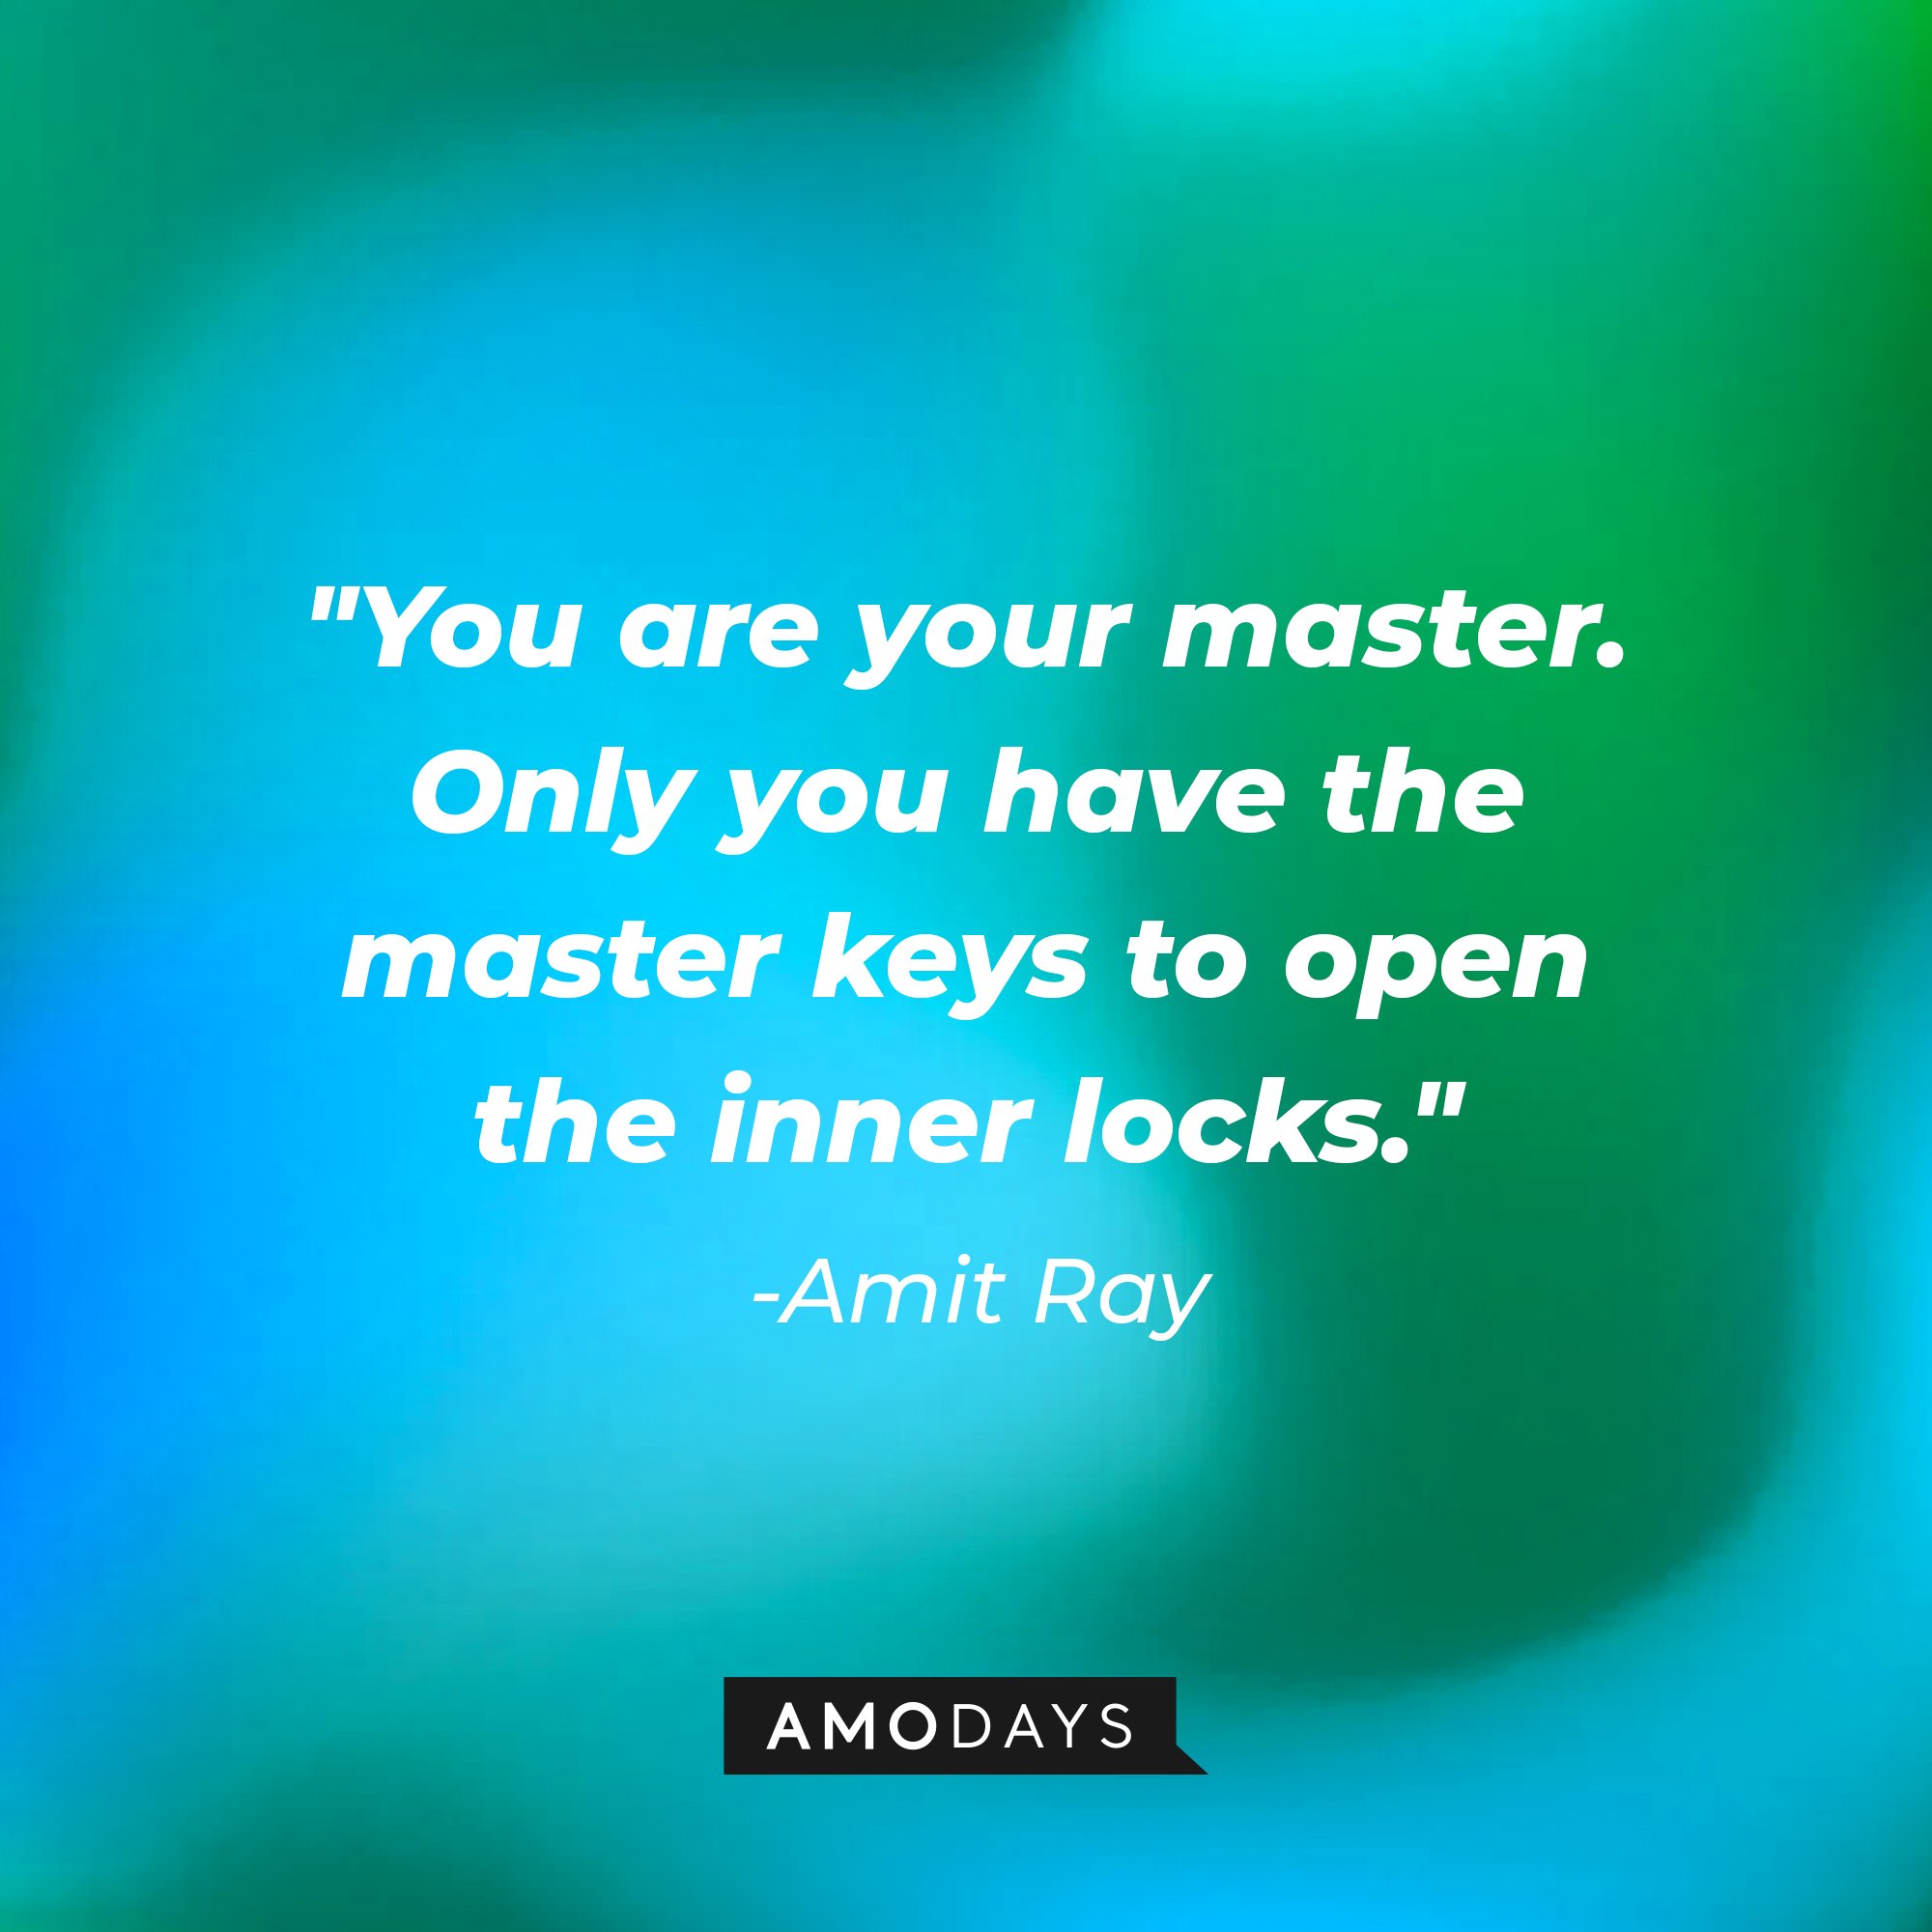 Amit Ray's quote: "You are your master. Only you have the master keys to open the inner locks." | Image: AmoDays